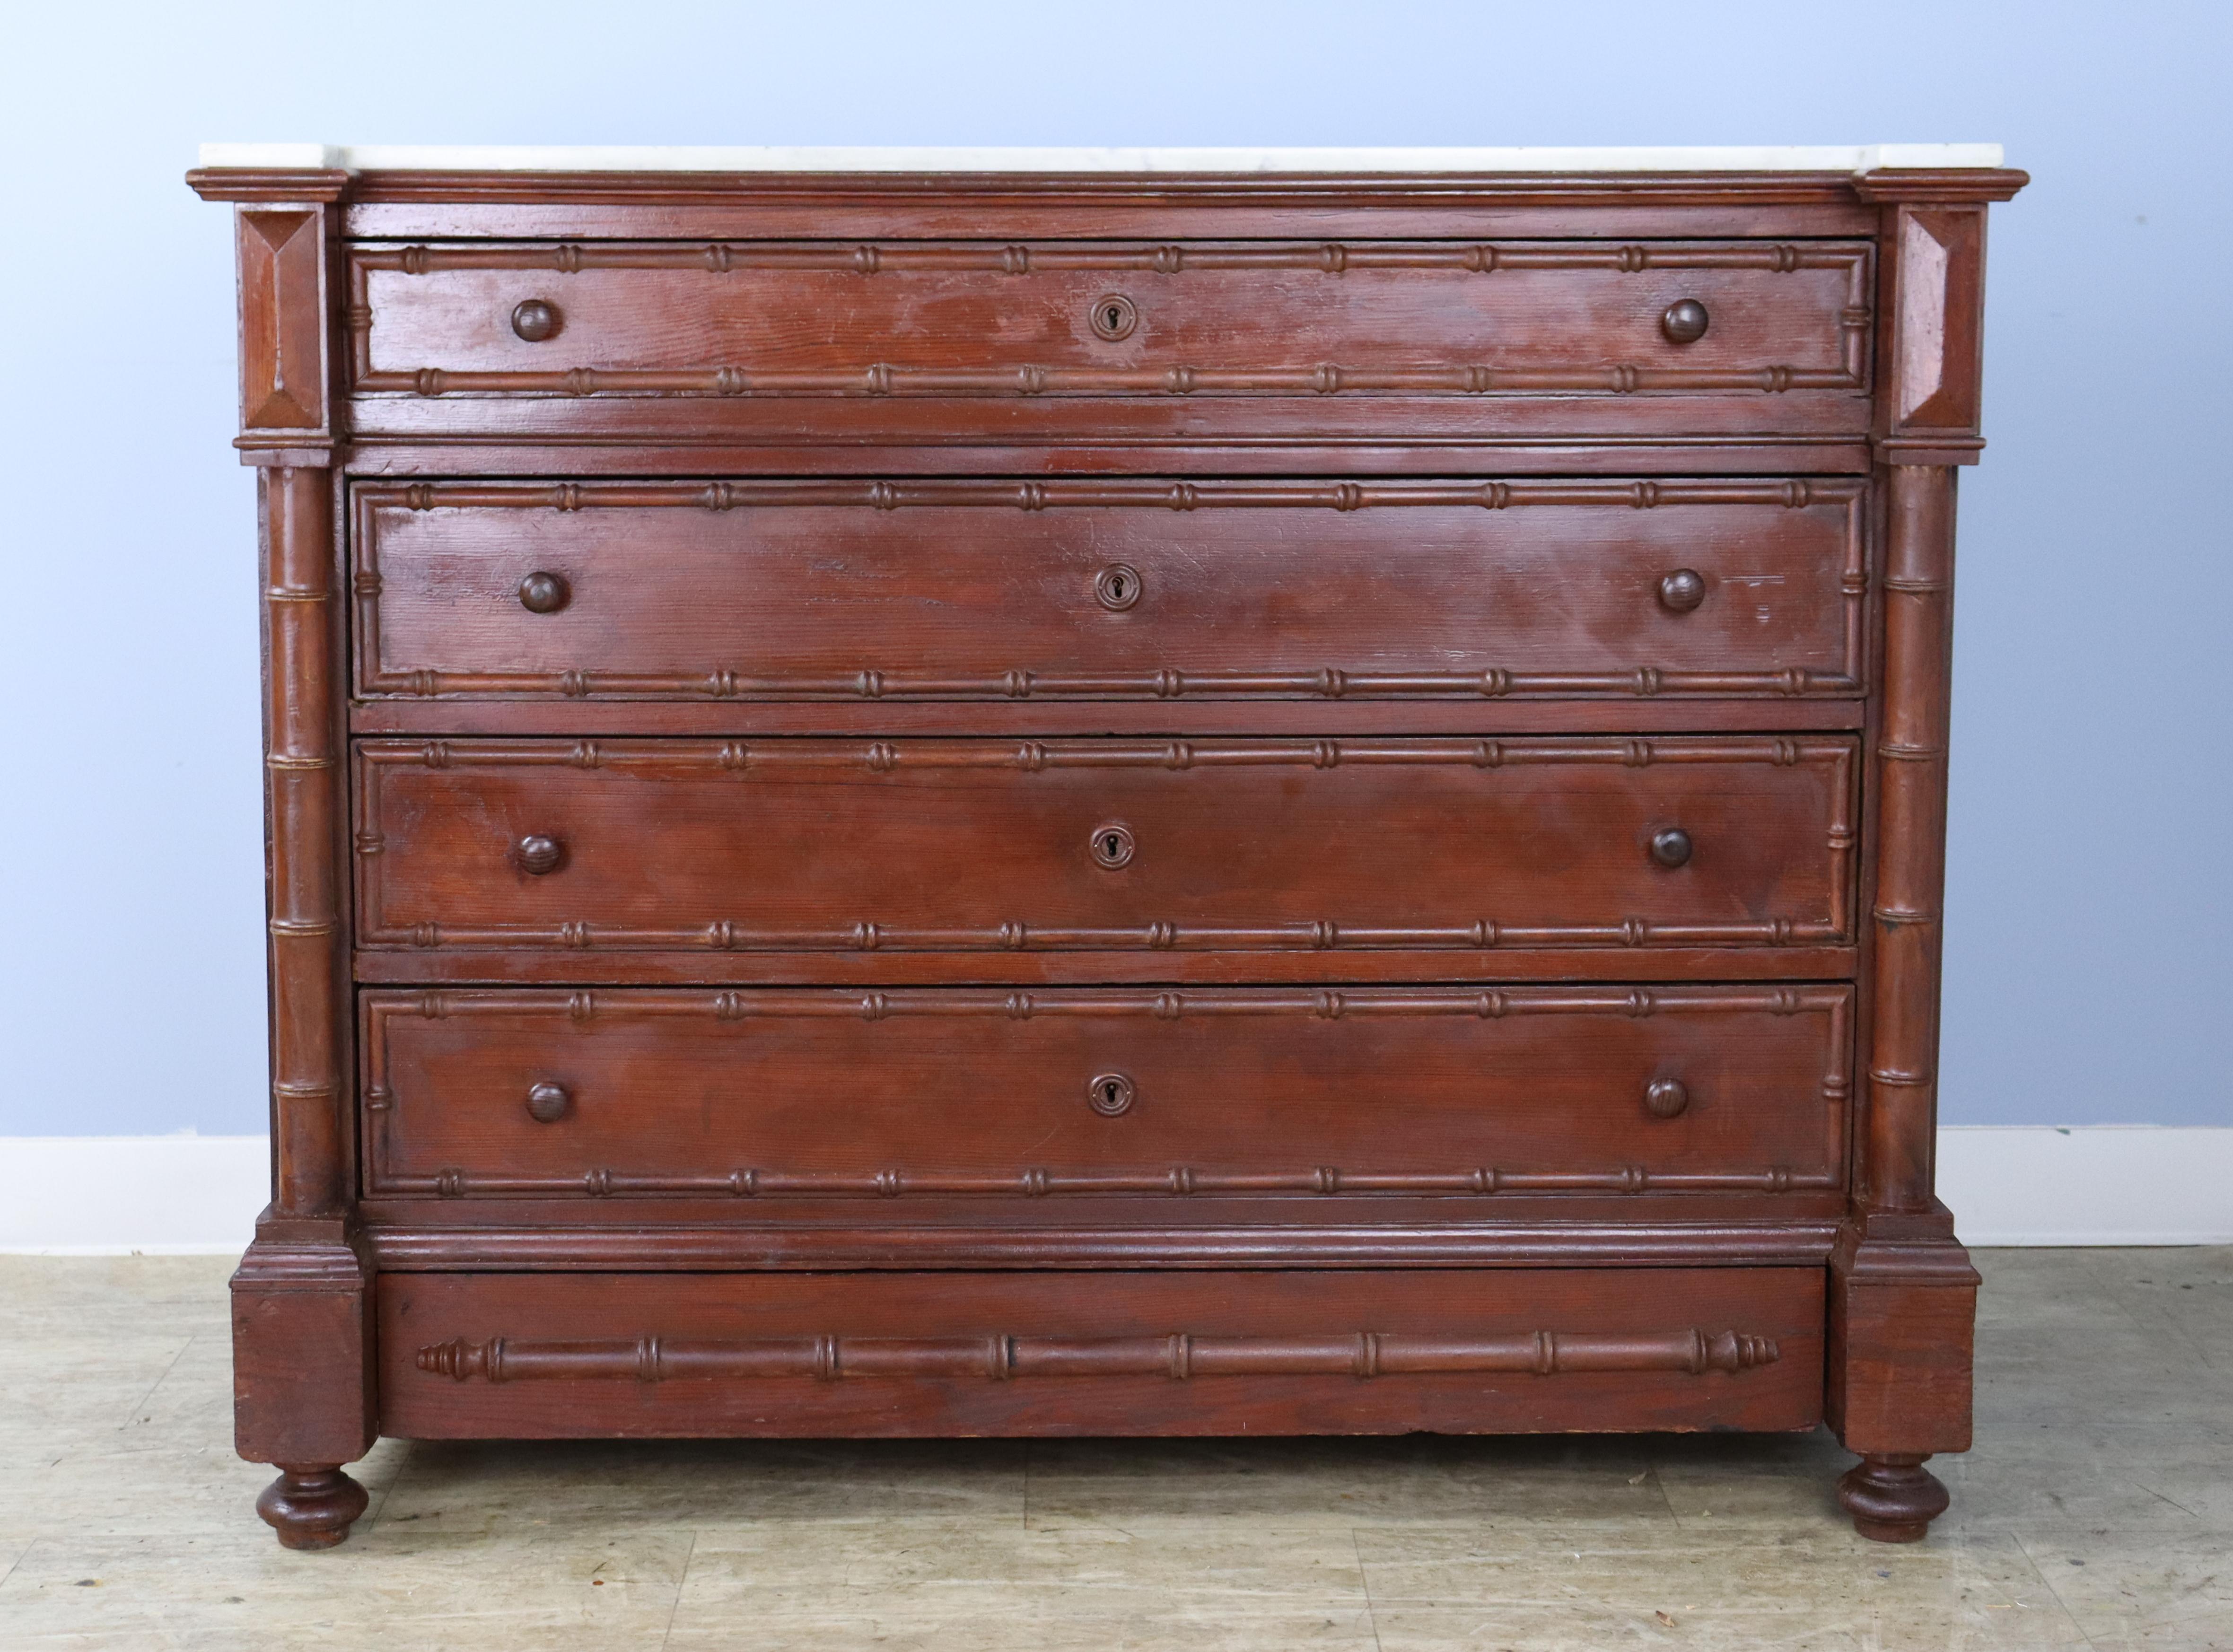 A charming dark pine chest of drawers with faux bamboo columns and mouldings. Slightly unusual construction with top detail and a hidden fifth drawer at the bottom. The marble which is original is fine antique condition, with the exception of some